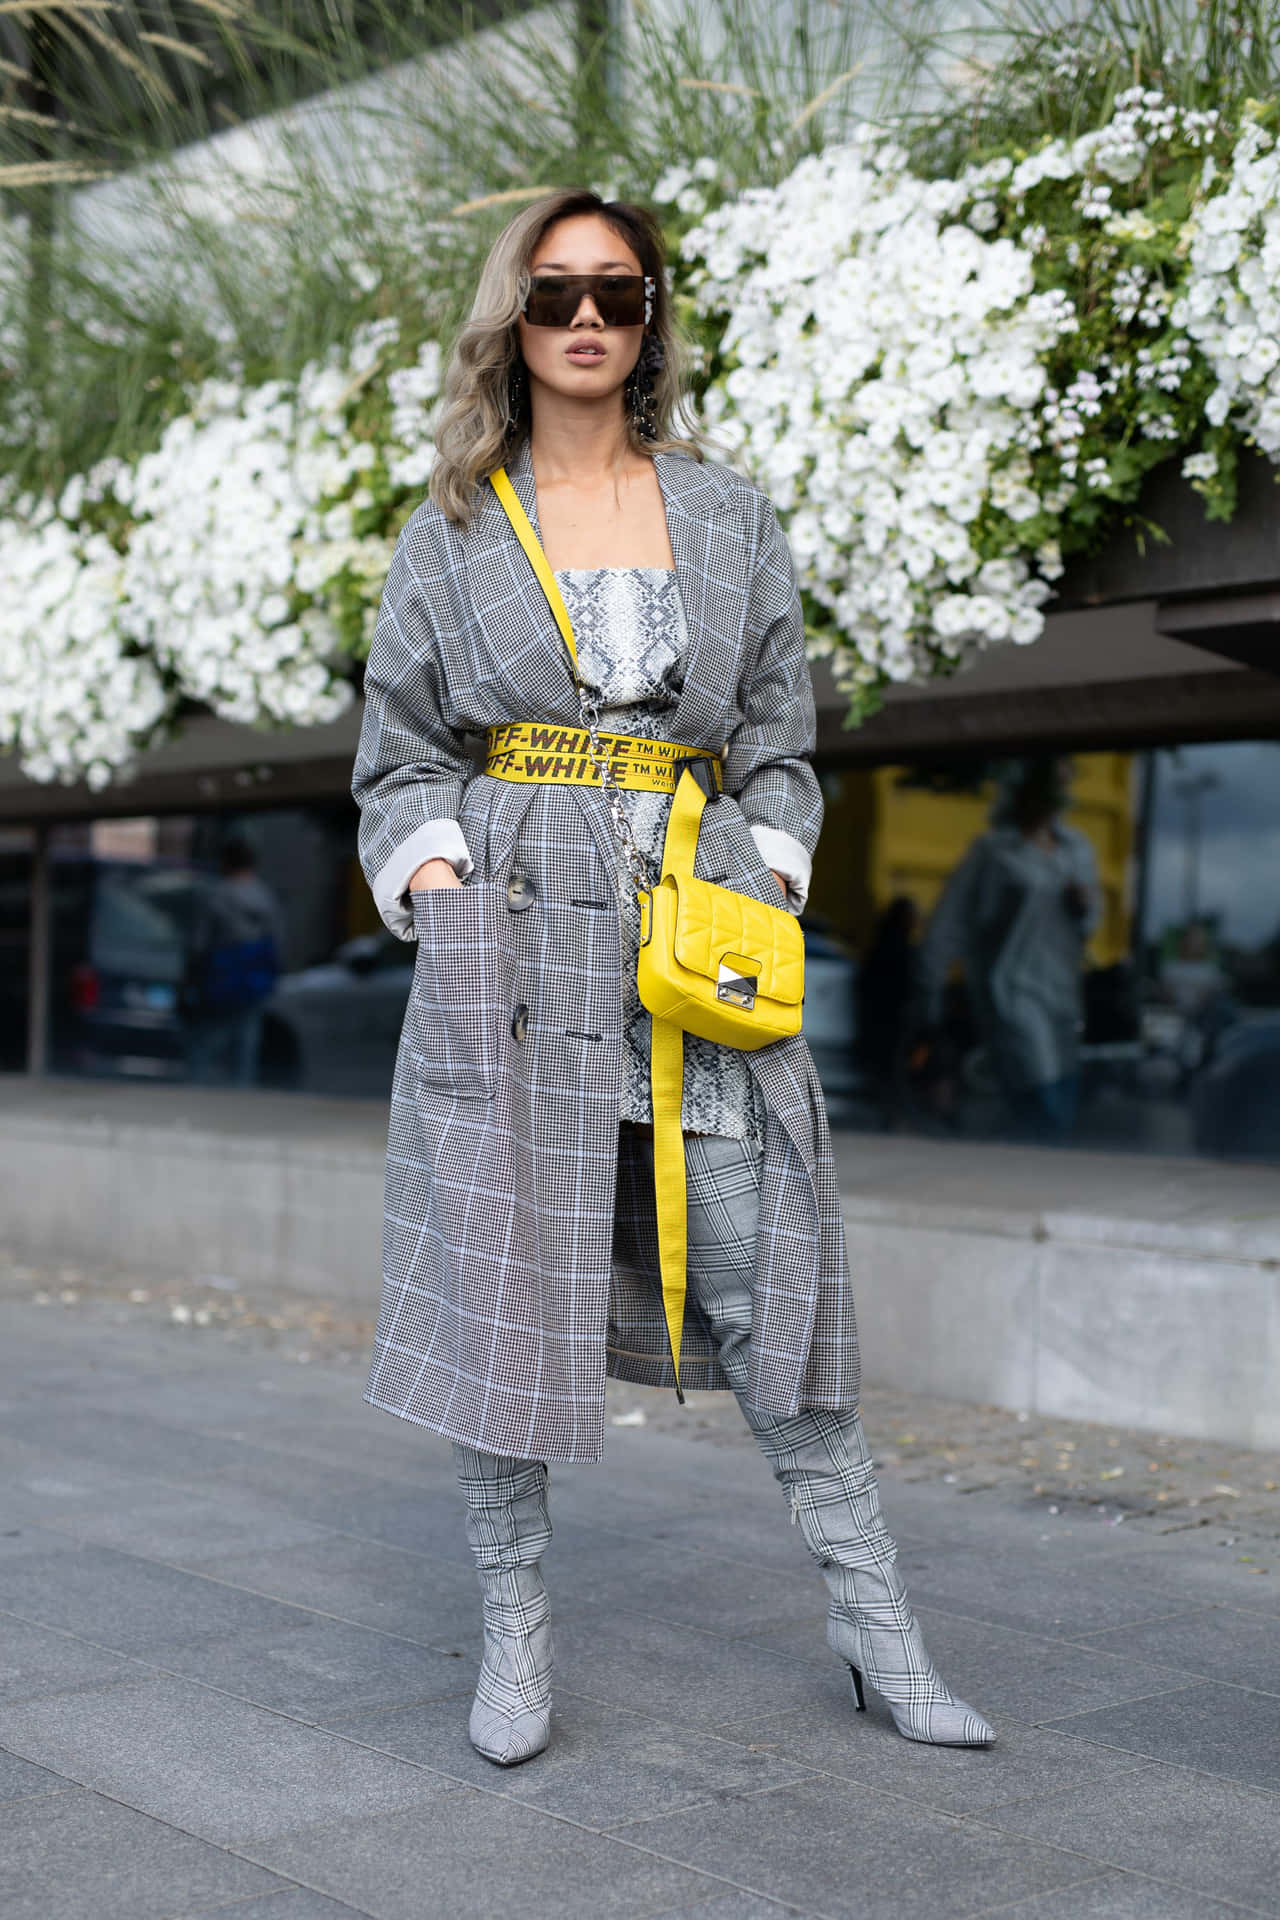 A Woman In A Grey Coat And Yellow Bag